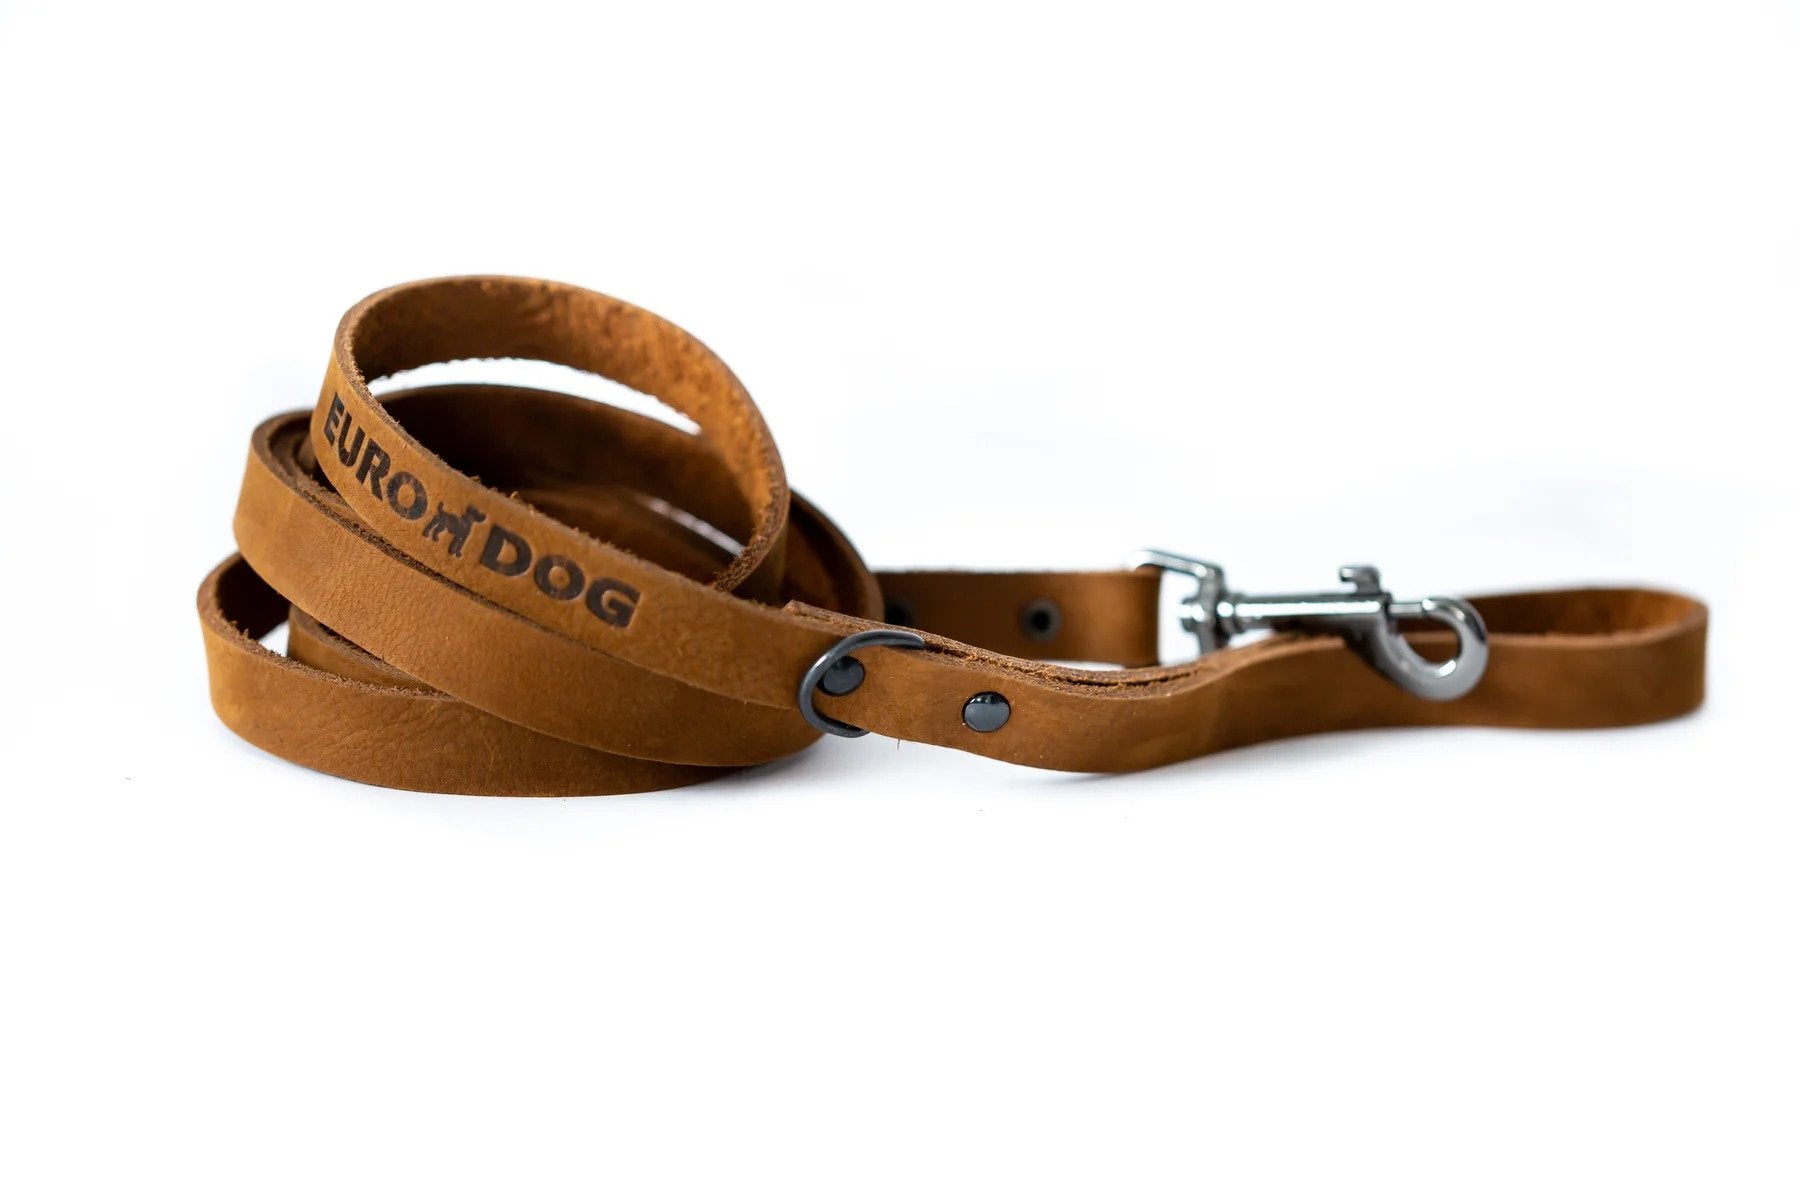 Eurodog Collars Soft Leather Sport Style Dog Leash Bark Brown Very Soft Leather